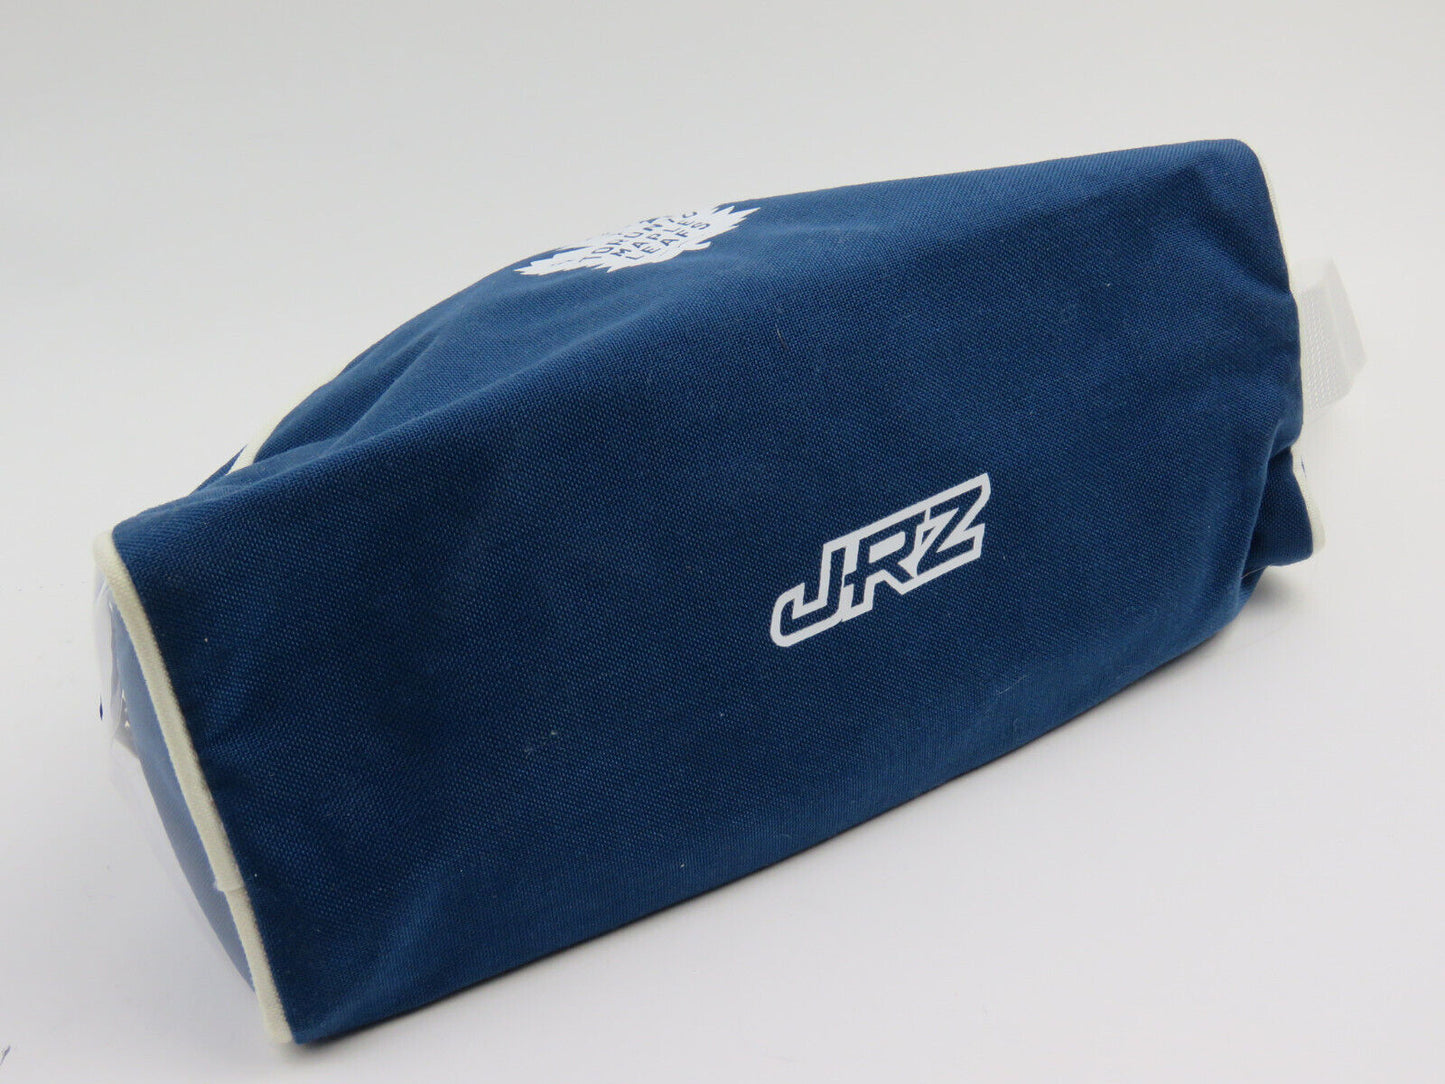 JRZ Toronto Maple Leafs NHL Pro Stock Hockey Player Issued Team Toiletry Bag